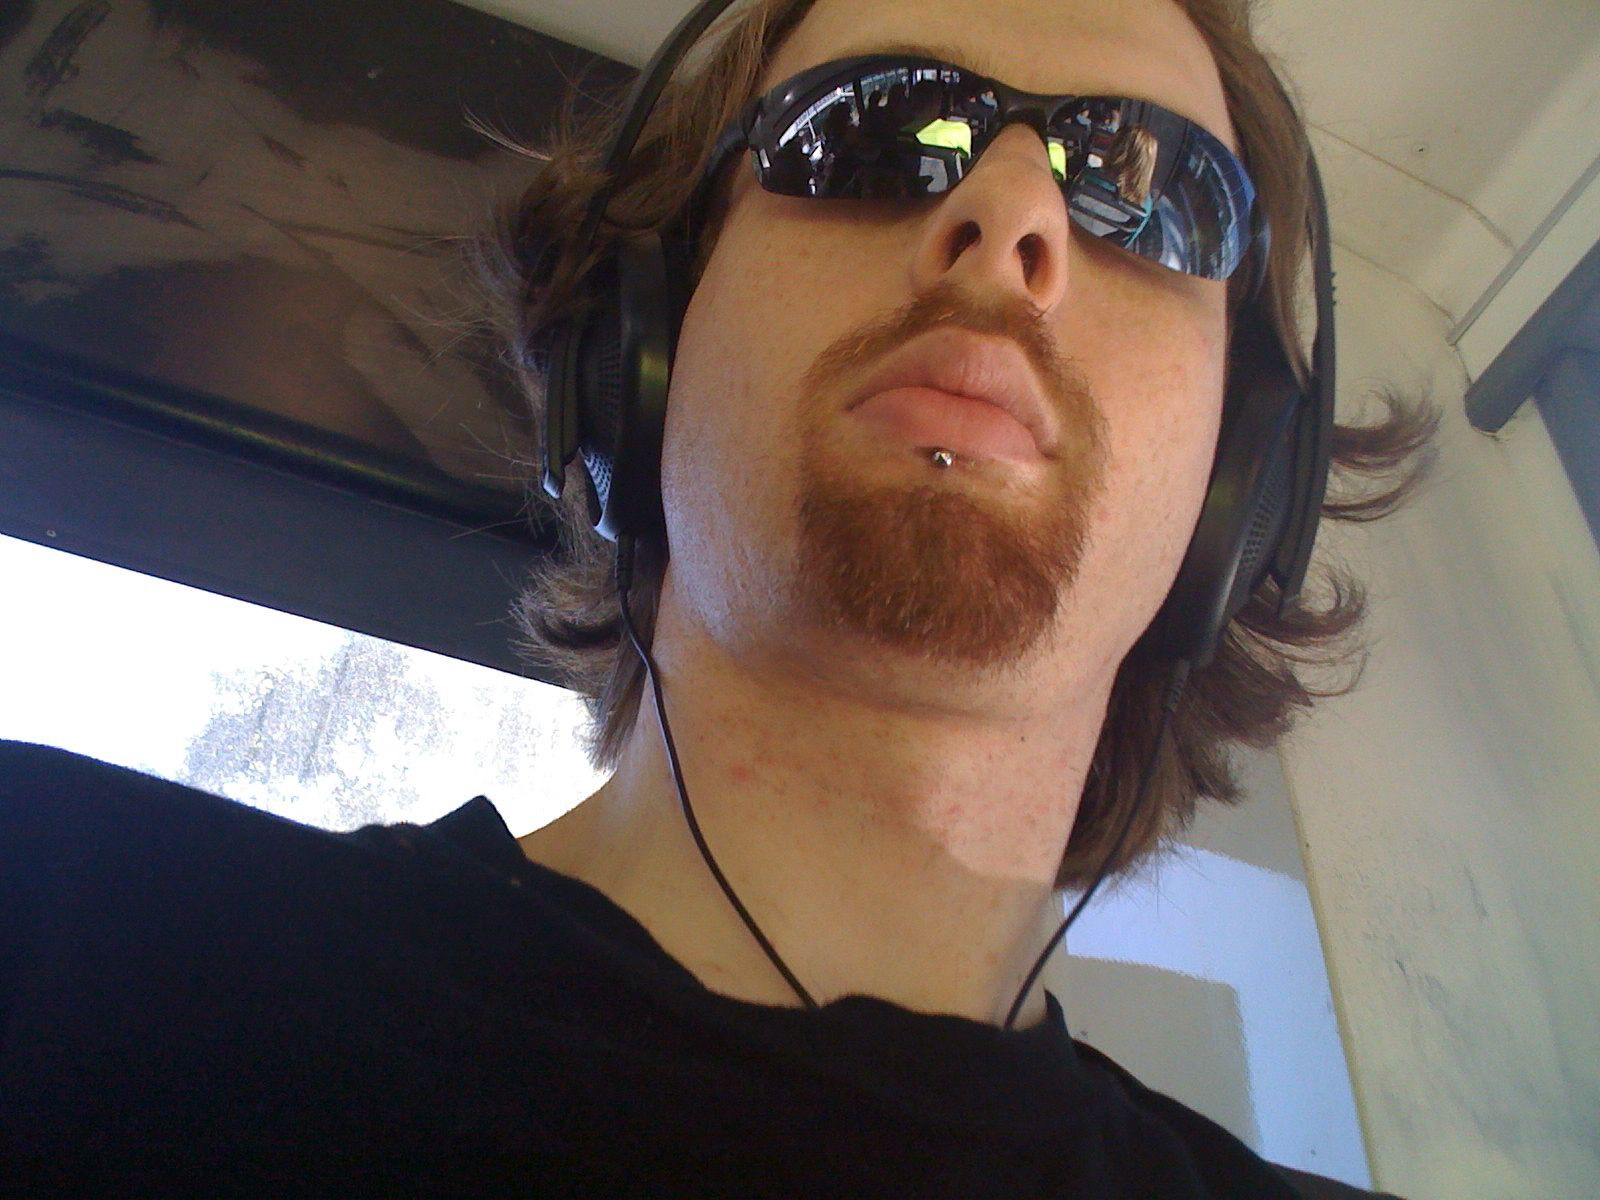 A selfie of me, a white man with not-quite-shoulder-length brown hair and a short nicely-trimmed red goatee. I'm wearing sunglasses and have big headphones on.